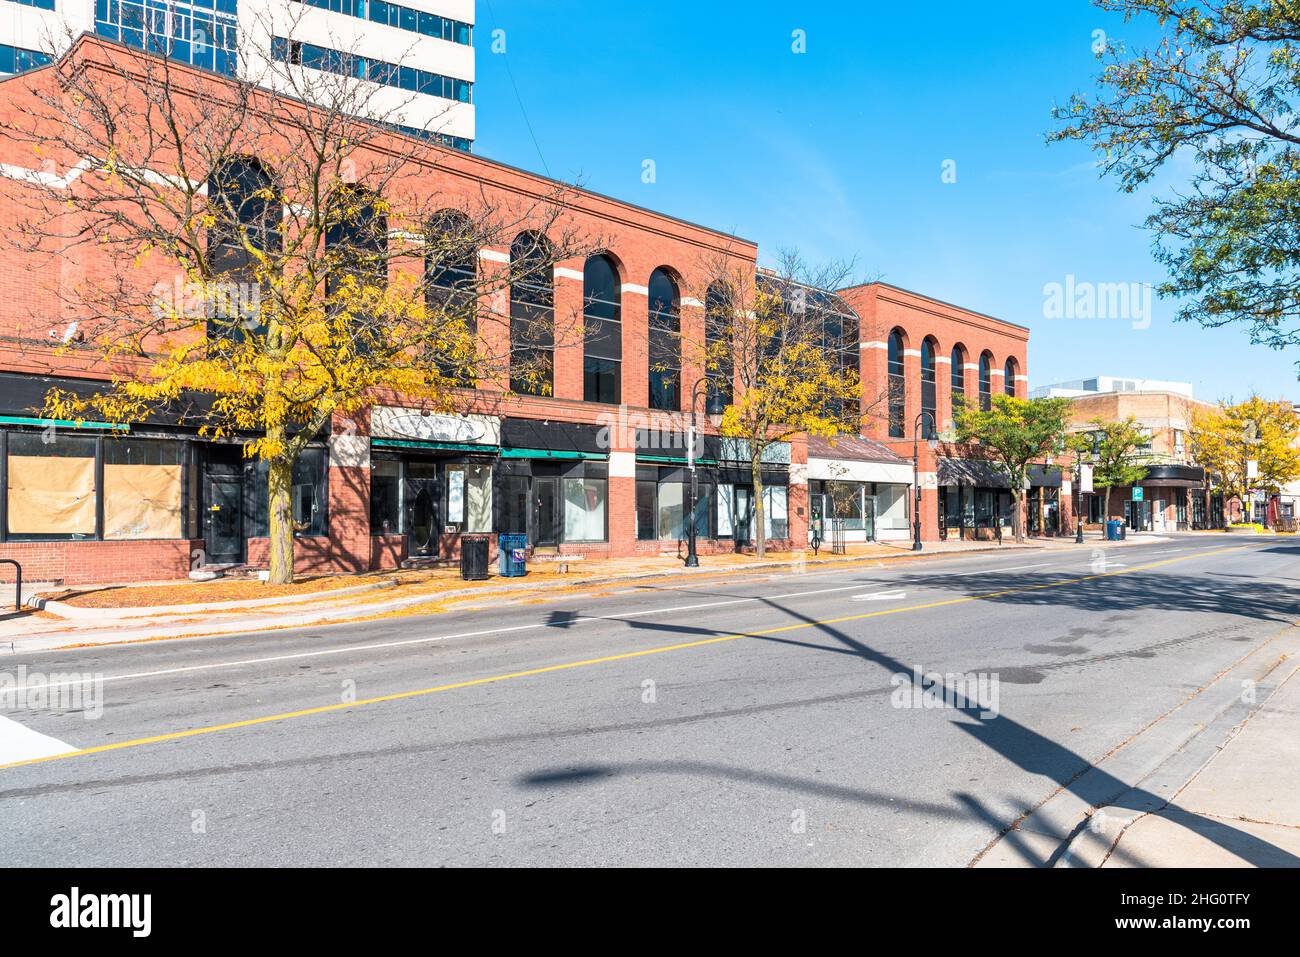 Closed business due to economic downturn along a street on a sunny autumn day Stock Photo